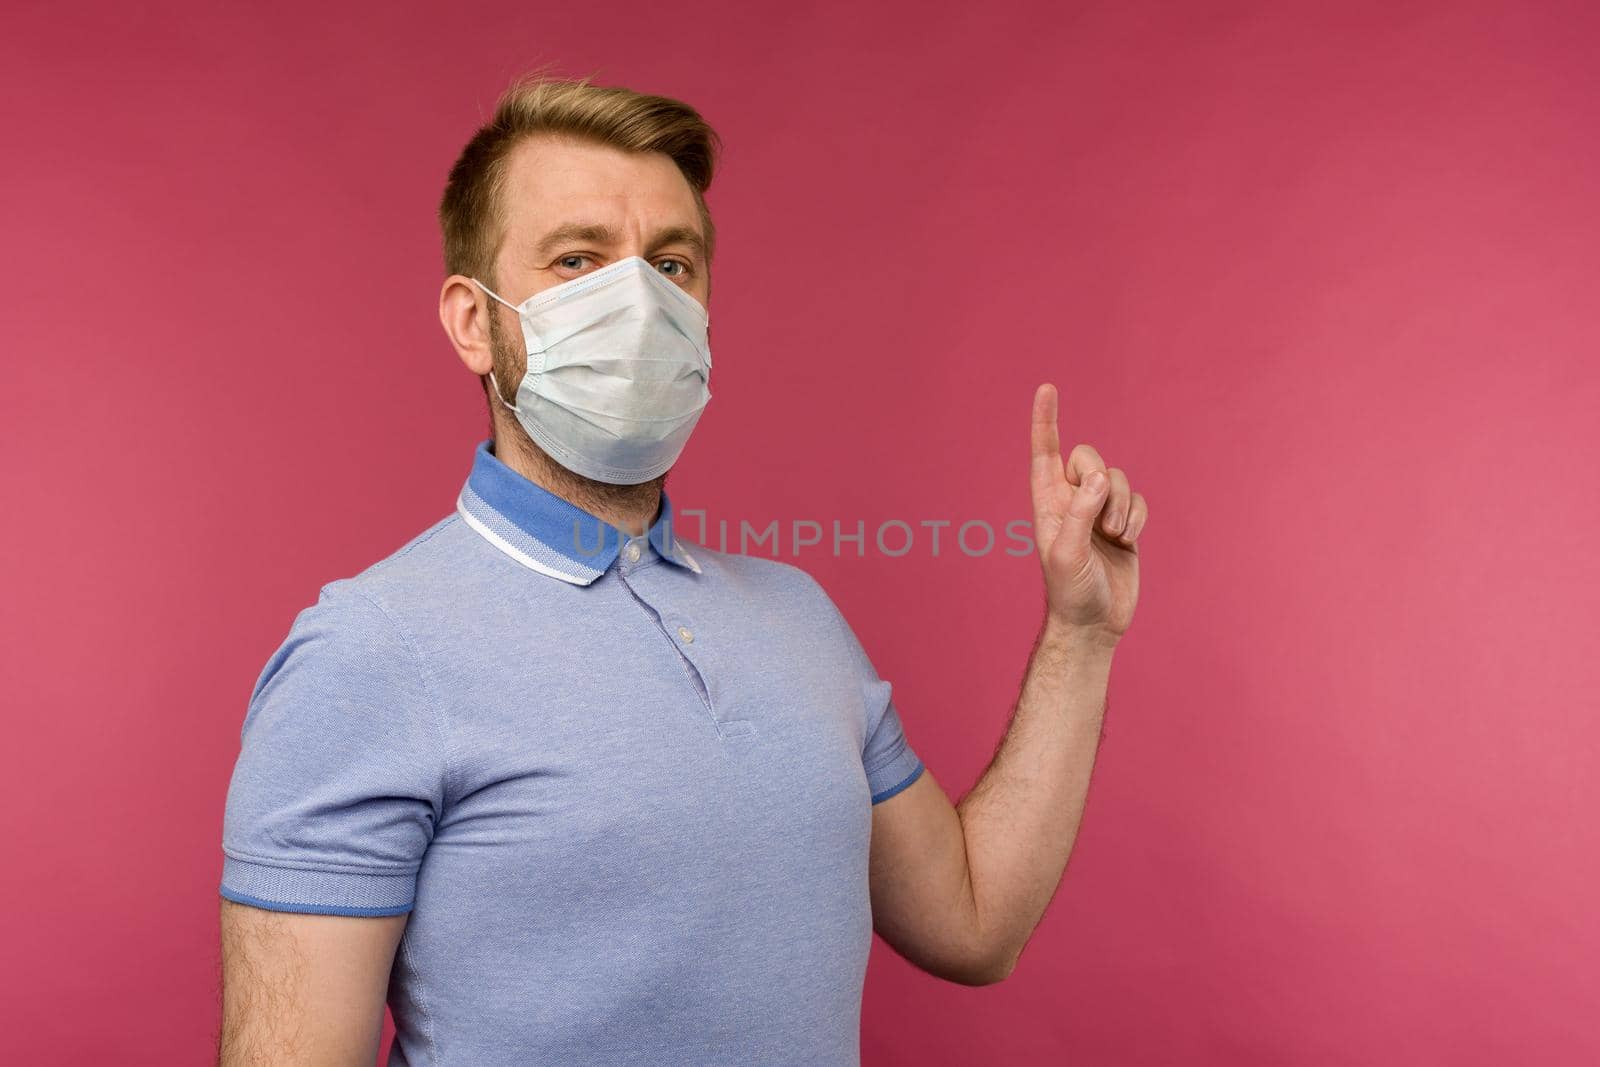 Protection against contagious disease, coronavirus. Man wearing hygienic mask to prevent infection, airborne respiratory illness such as flu, 2019-nCoV. indoor studio shot isolated on red background